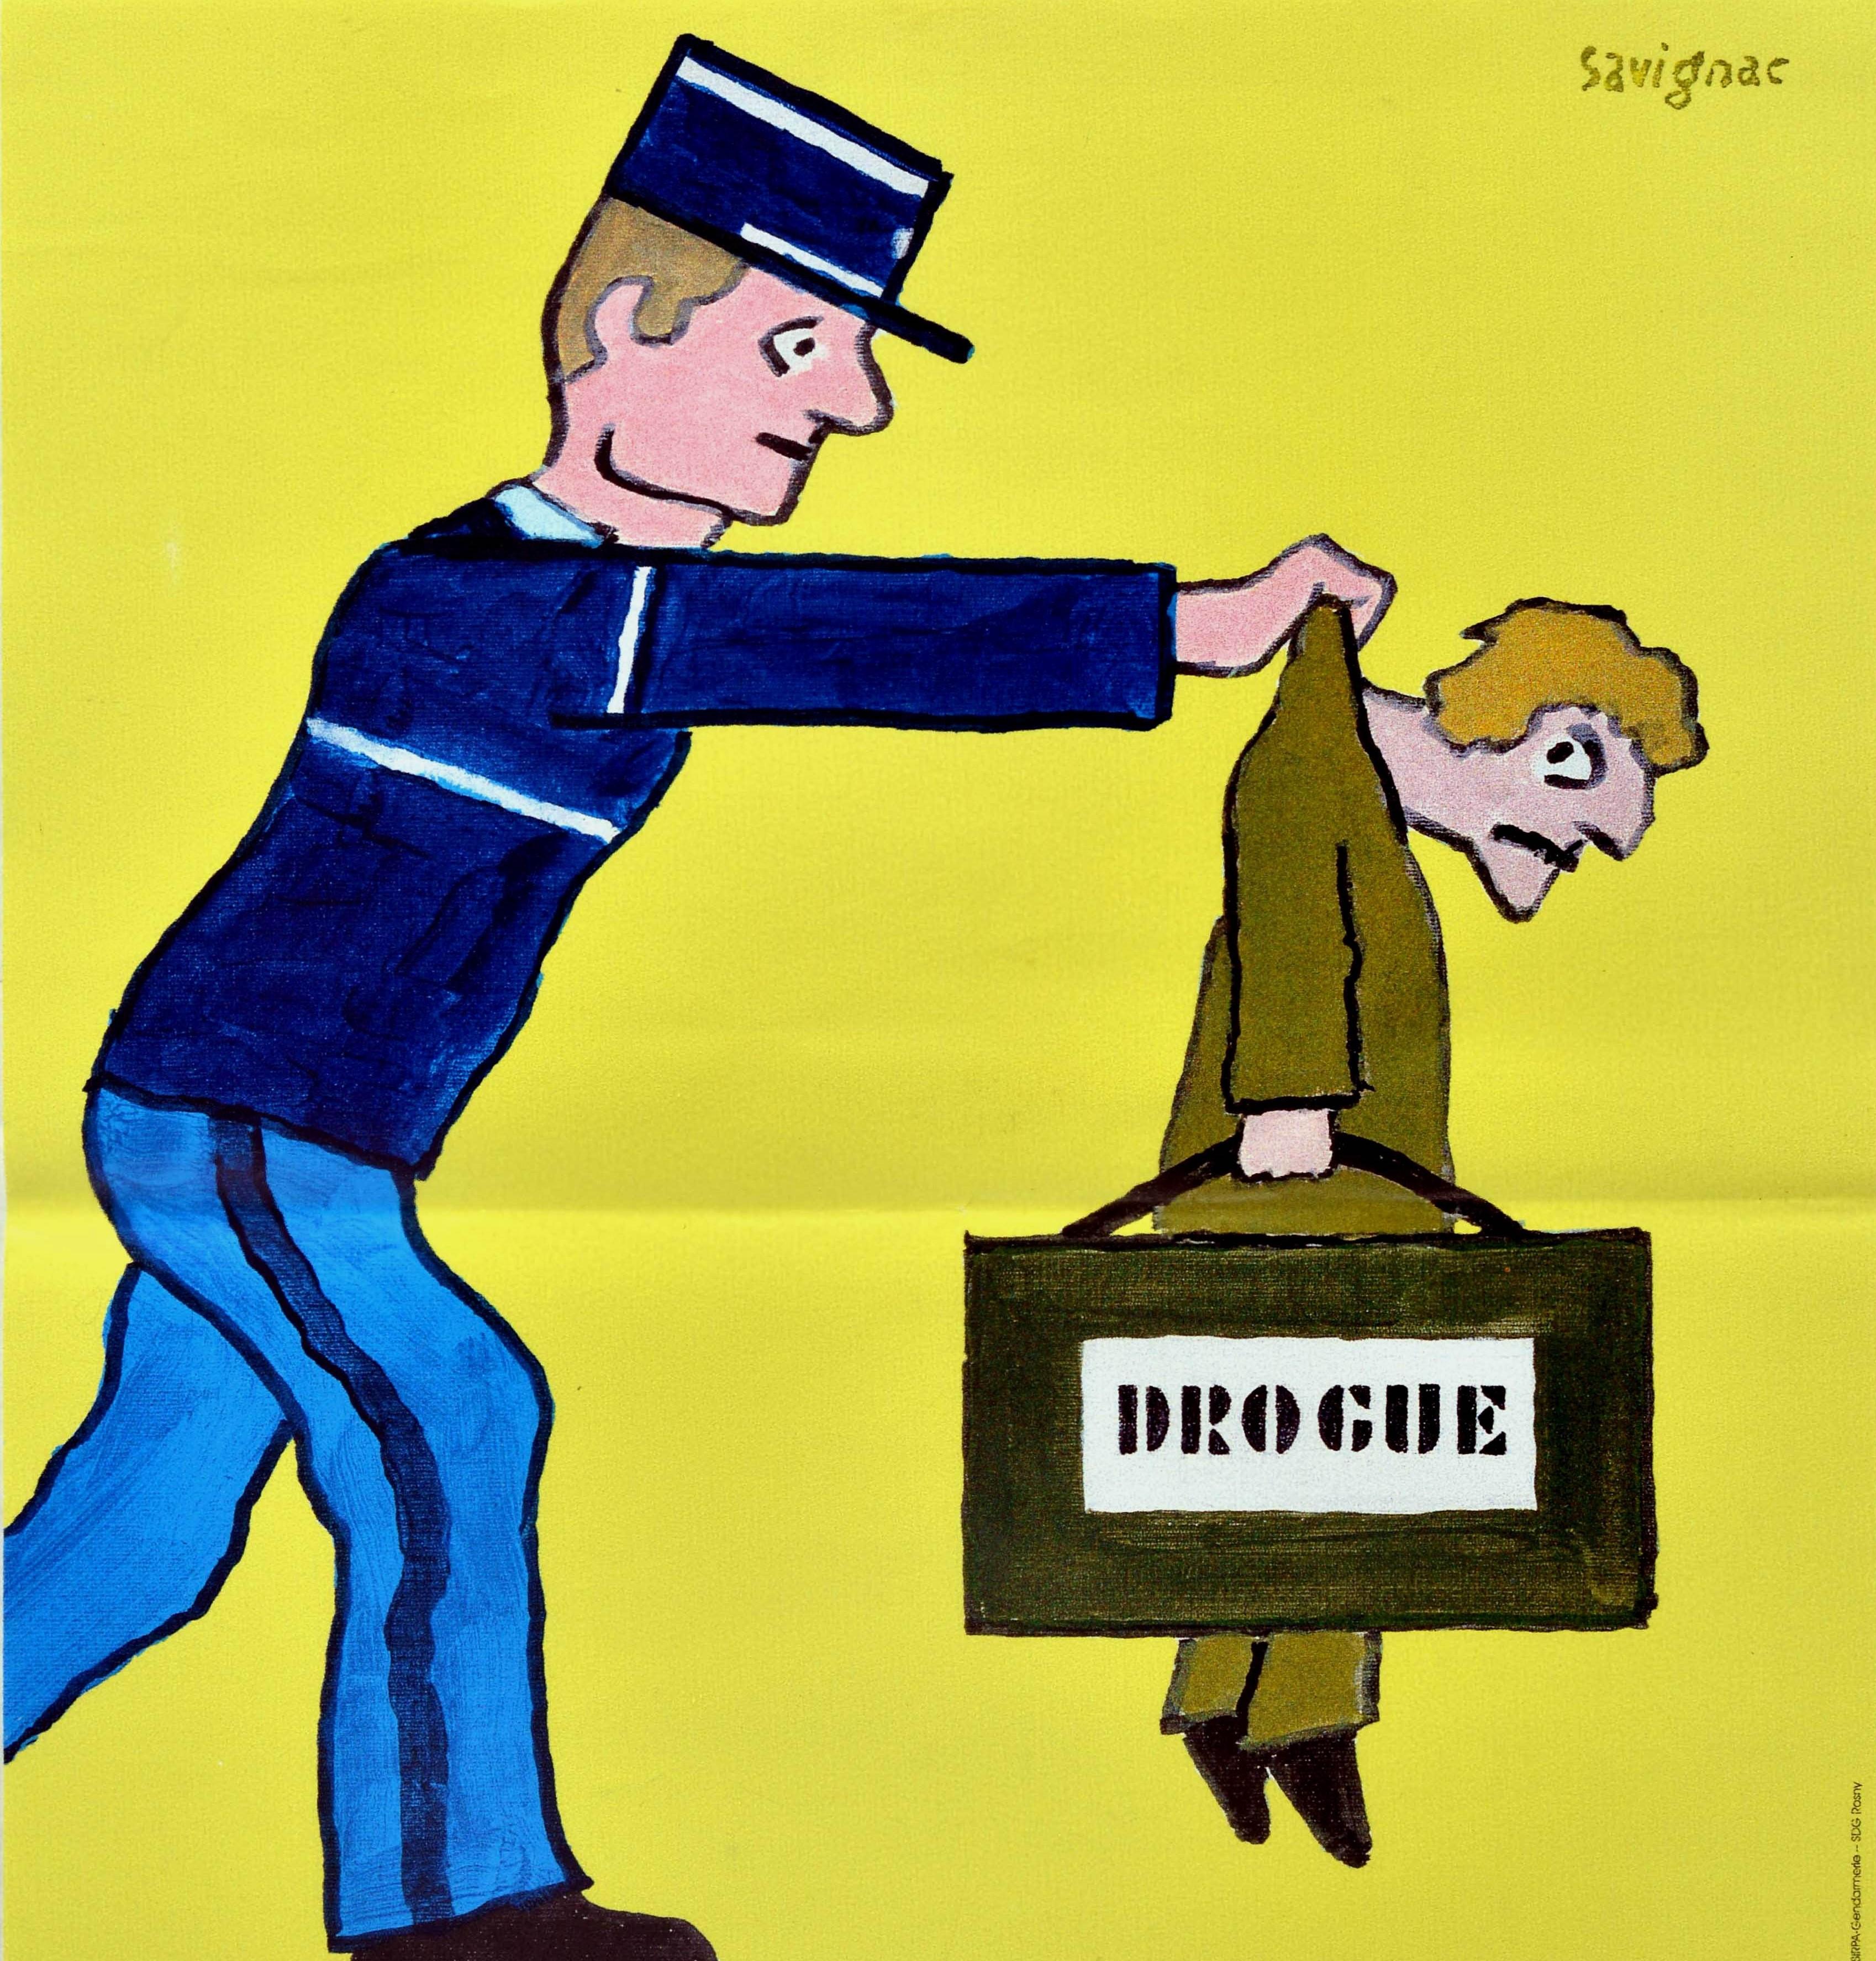 Original vintage propaganda poster for the French police force - Le Gendarme Sevit / The Police are Everywhere - featuring a cartoon style design by the notable French graphic artist Raymond Savignac (1907-2002) depicting a police officer dressed in